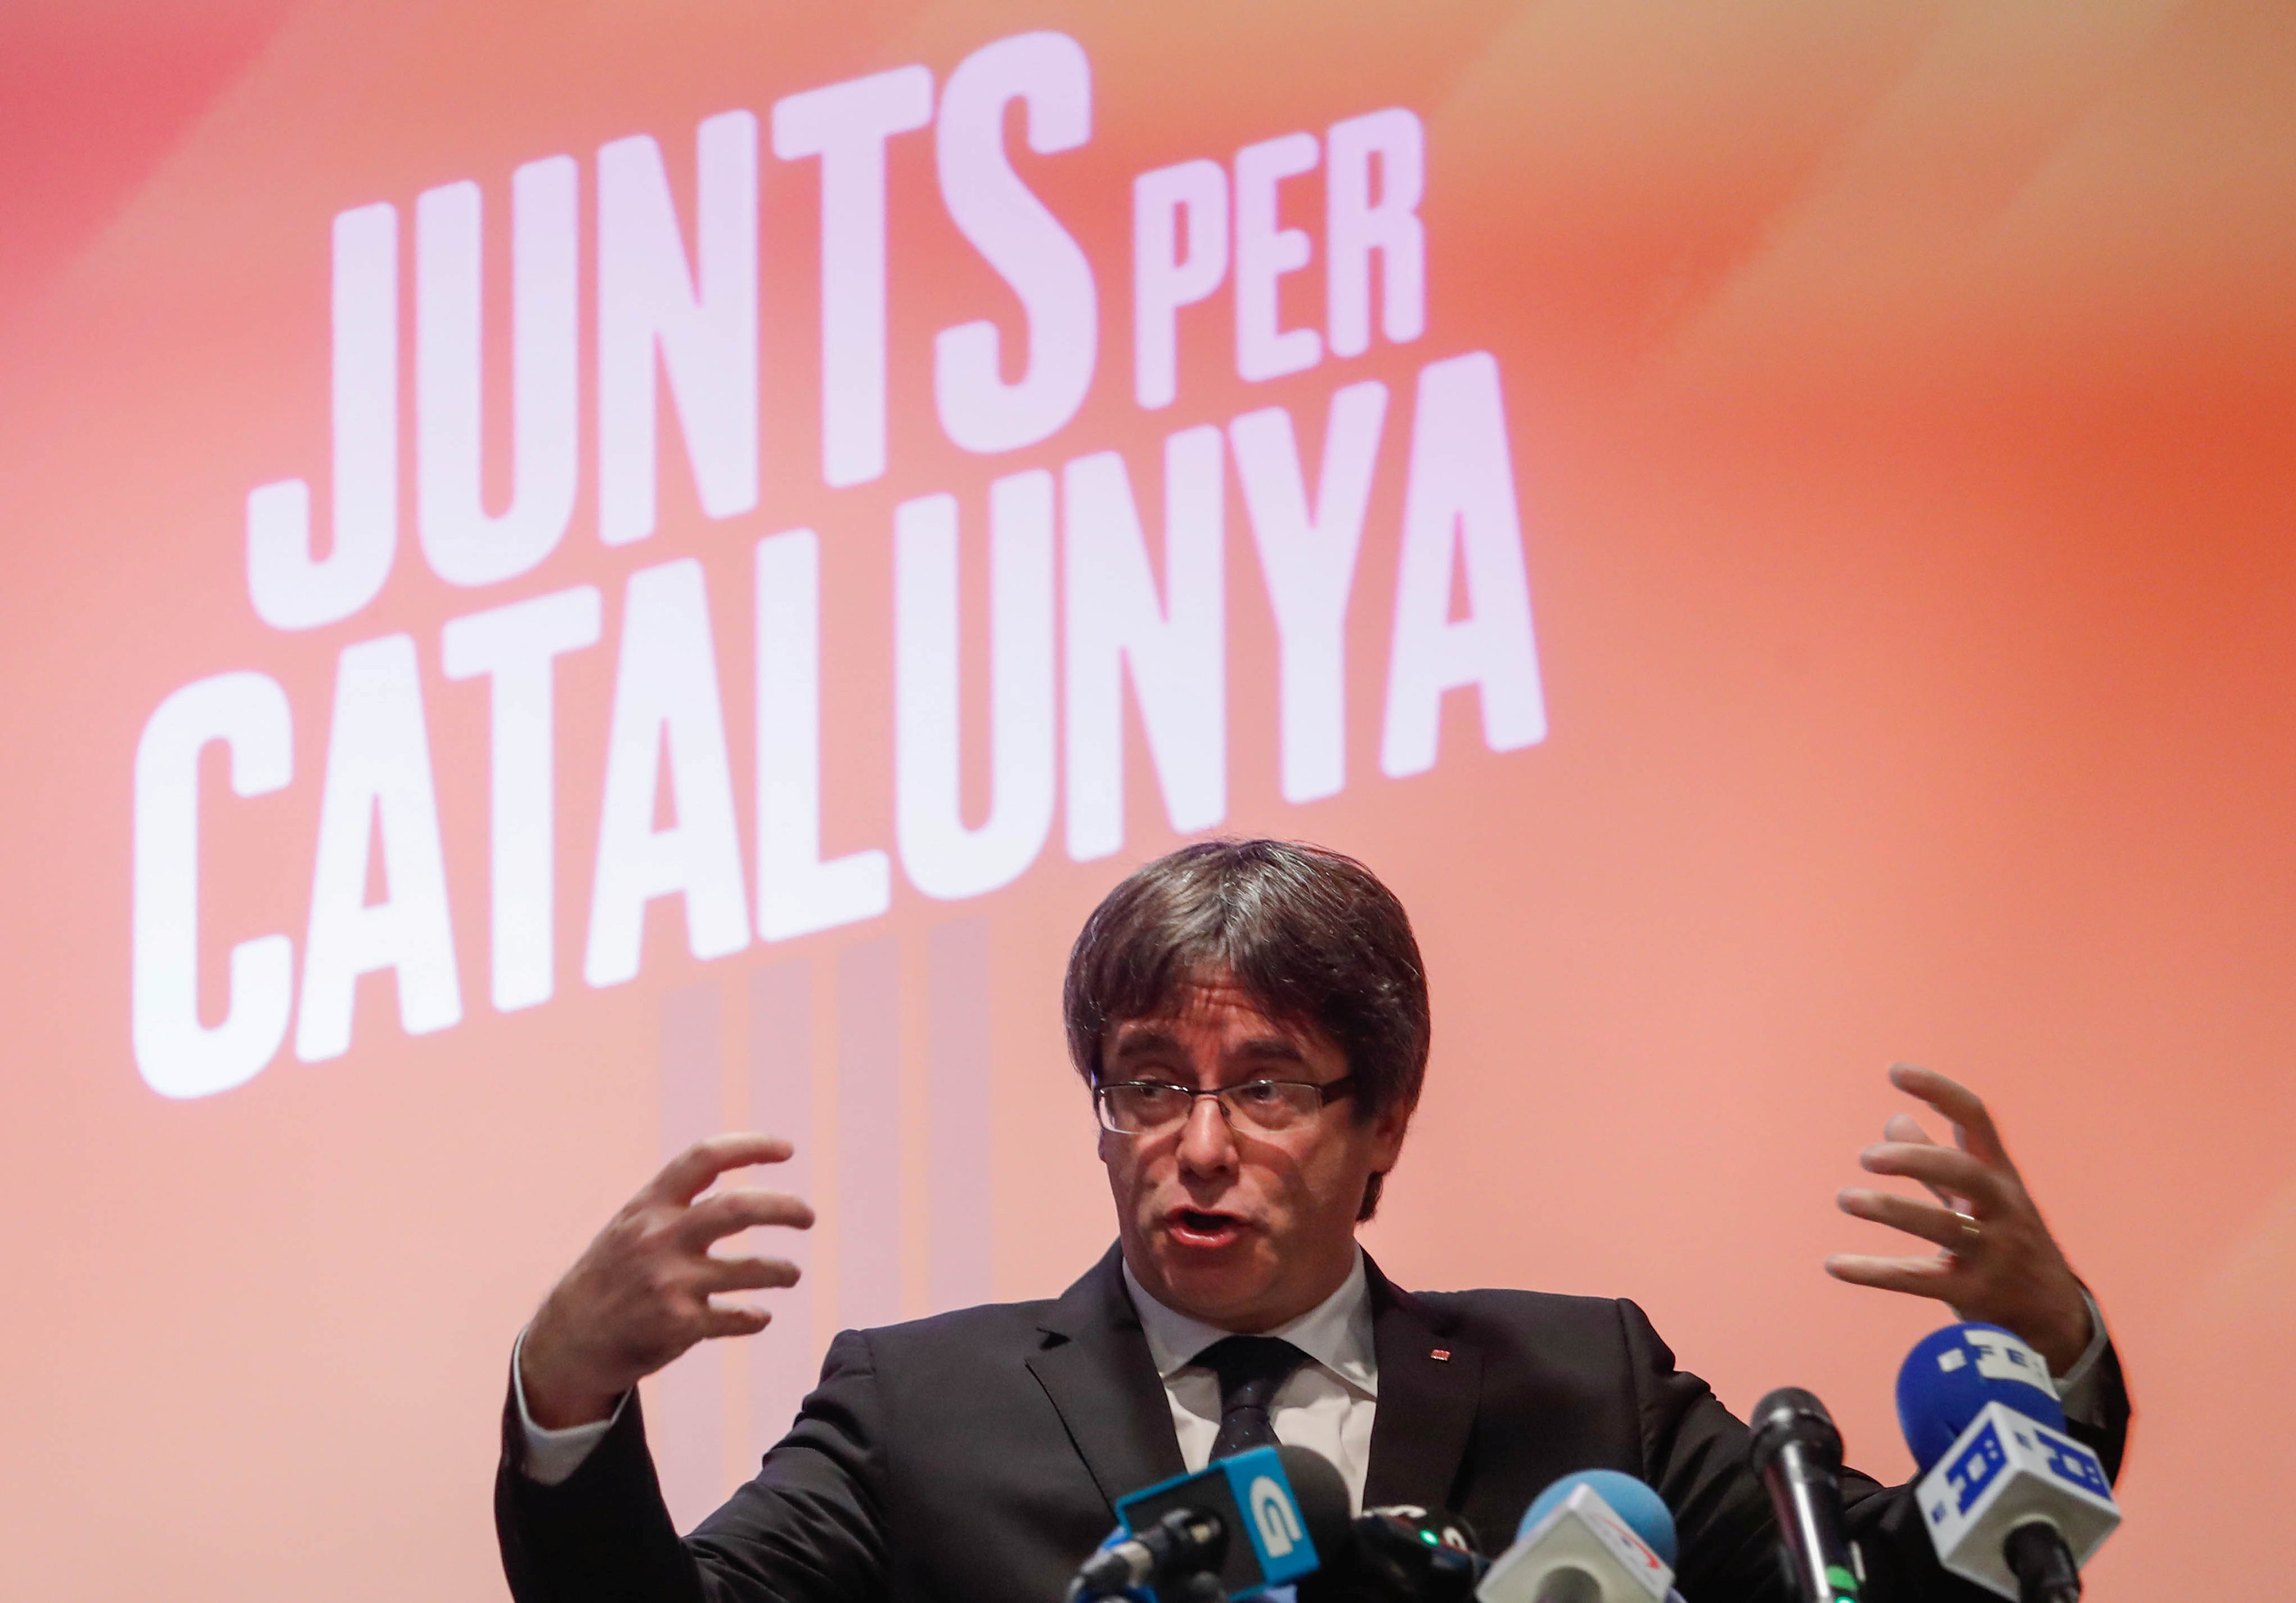 Polls must 'ratify' Catalonia's desire for independence